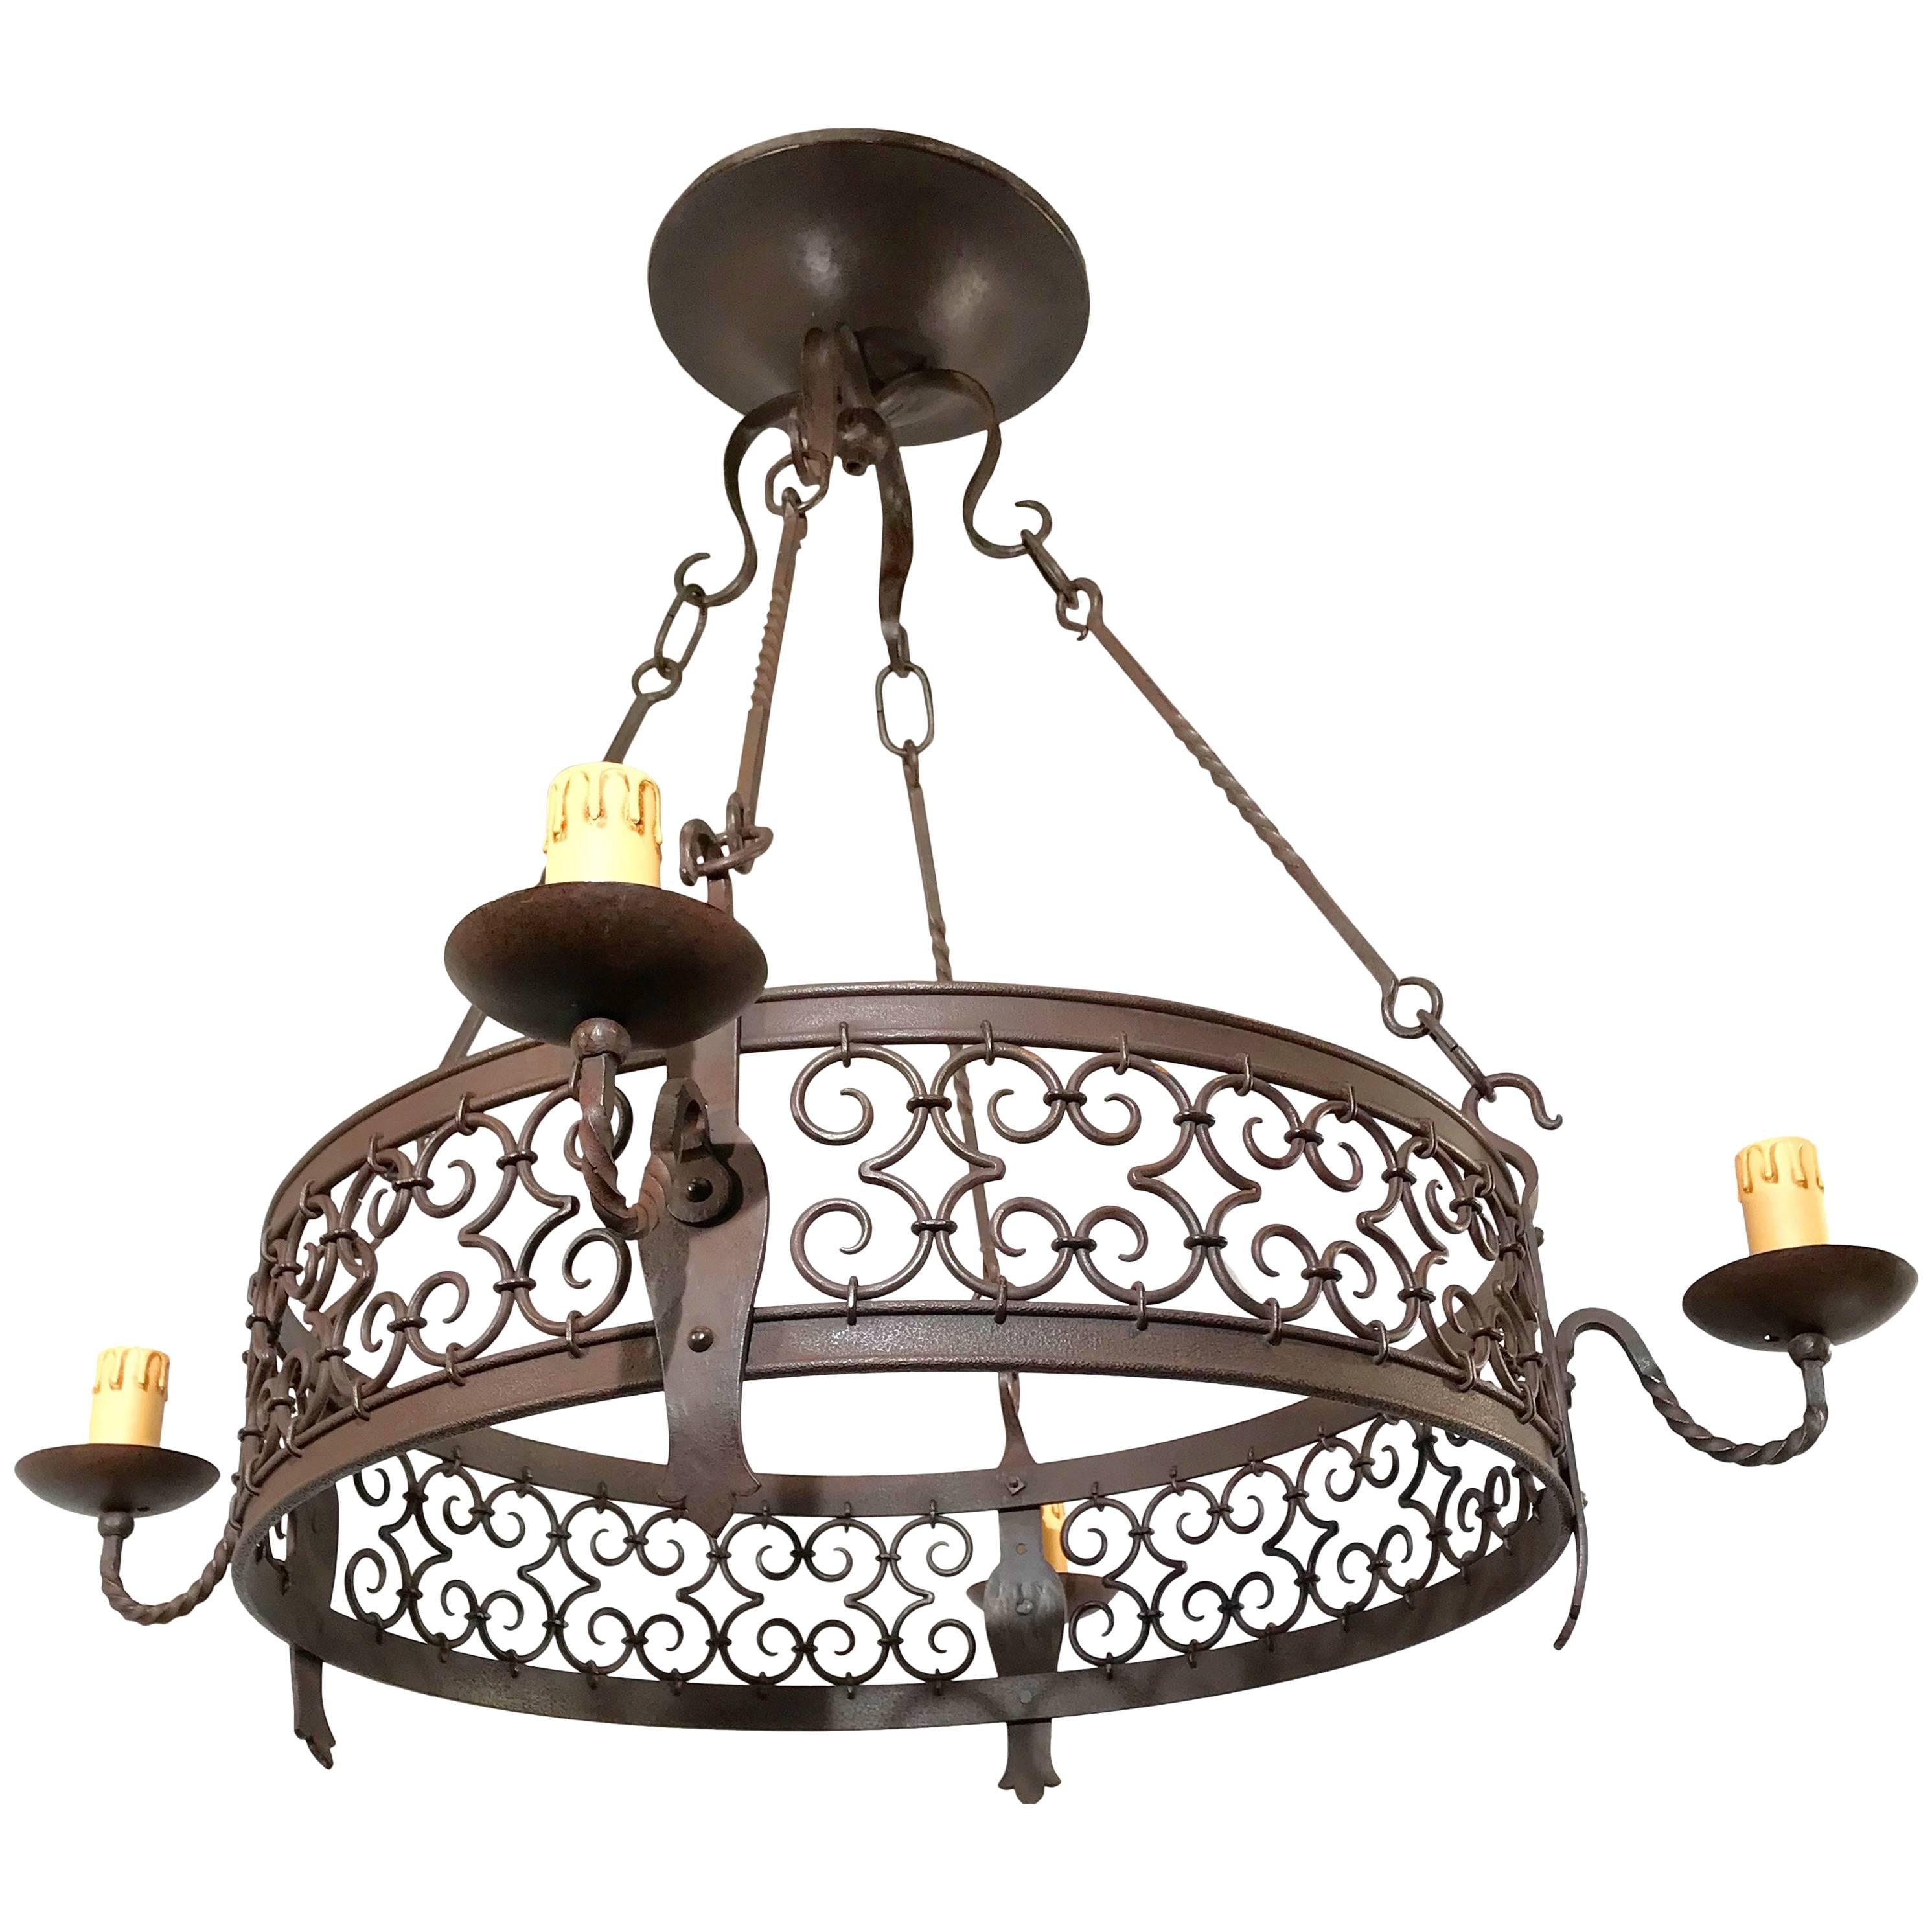 Large Arts & Crafts Forged in Fire Wrought Iron Chandelier Suspension Light Fixture